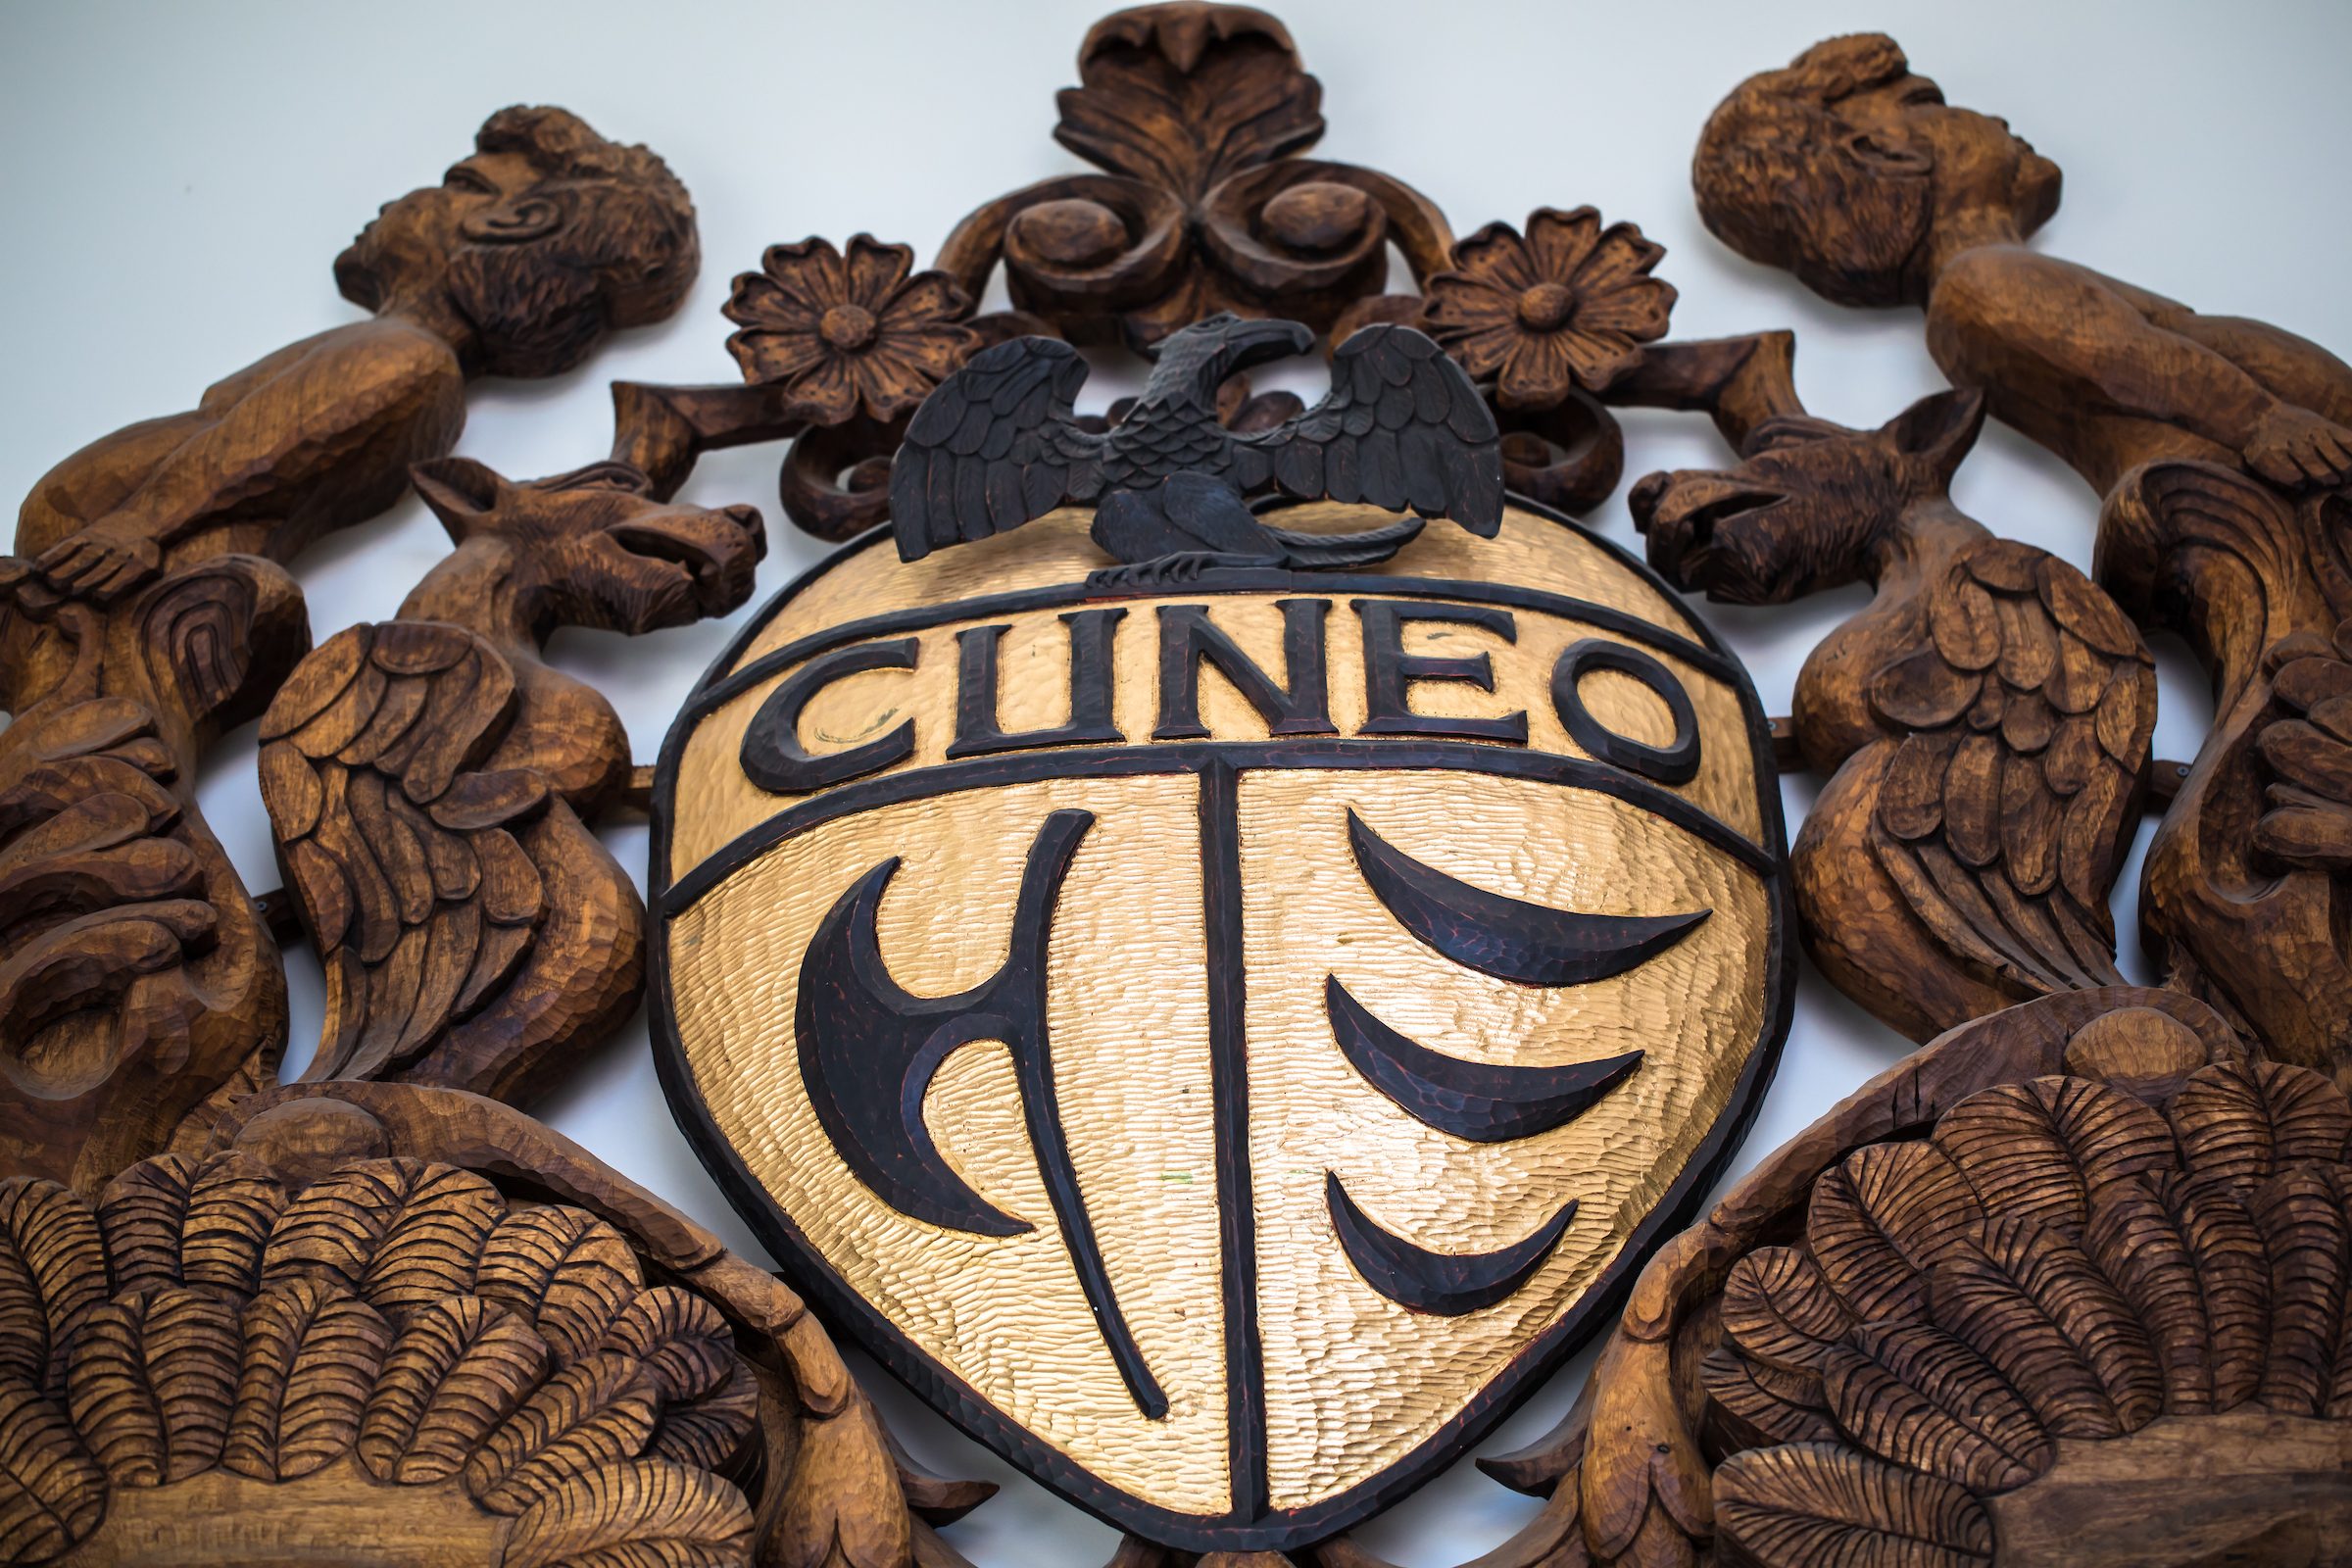 Cuneo family crest by Campbell “Camp” Bosworth of Texas; installed May 2012. The hand-carved wooden shield, made of black walnut and gold leaf, bears the Cuneo family crest. With elaborate half-moon faces, griffins, and cherubs, the crest measures 7.5 feet tall by 6.5 feet wide and weighs 350 pounds. It is in the entrance to Cuneo Hall and was created in honor of the Cuneo family, who have generously supported the University over the years. (Photo: Lukas Keapproth)